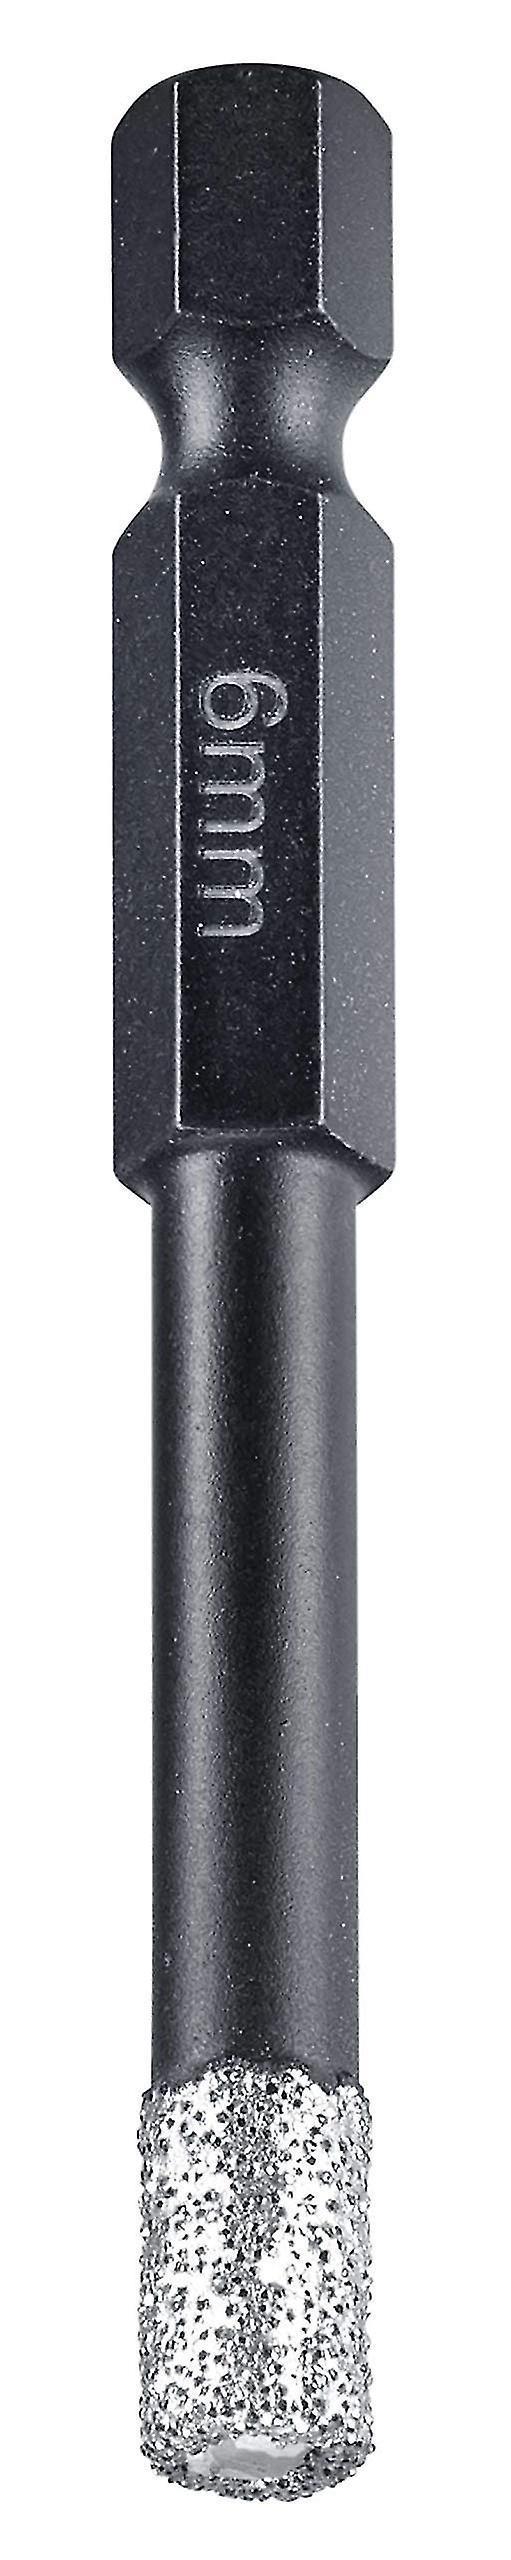 Tile Diamond Bit For Drills Hole Saw With E 6.3 Or M14 Attachment (depending On Size)